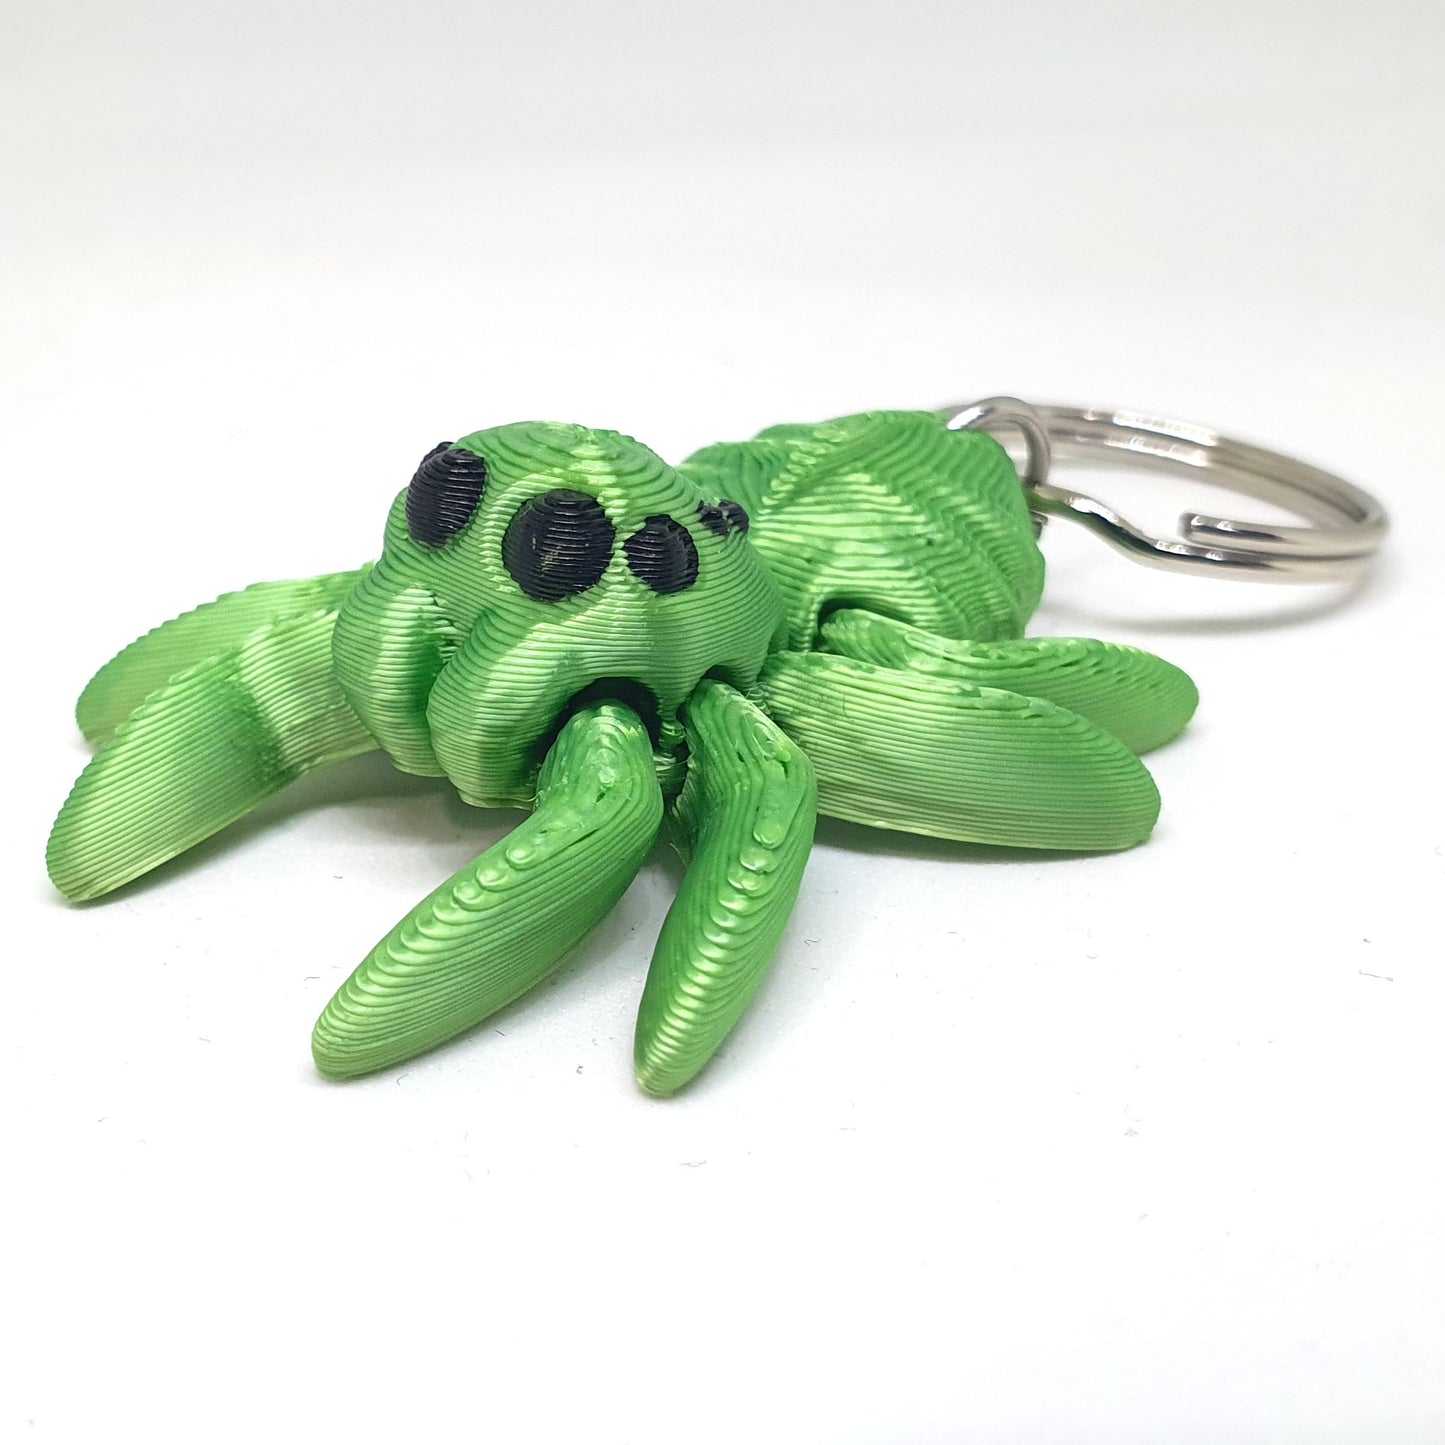 Cute Articulated Spider Keychain Blind Bag